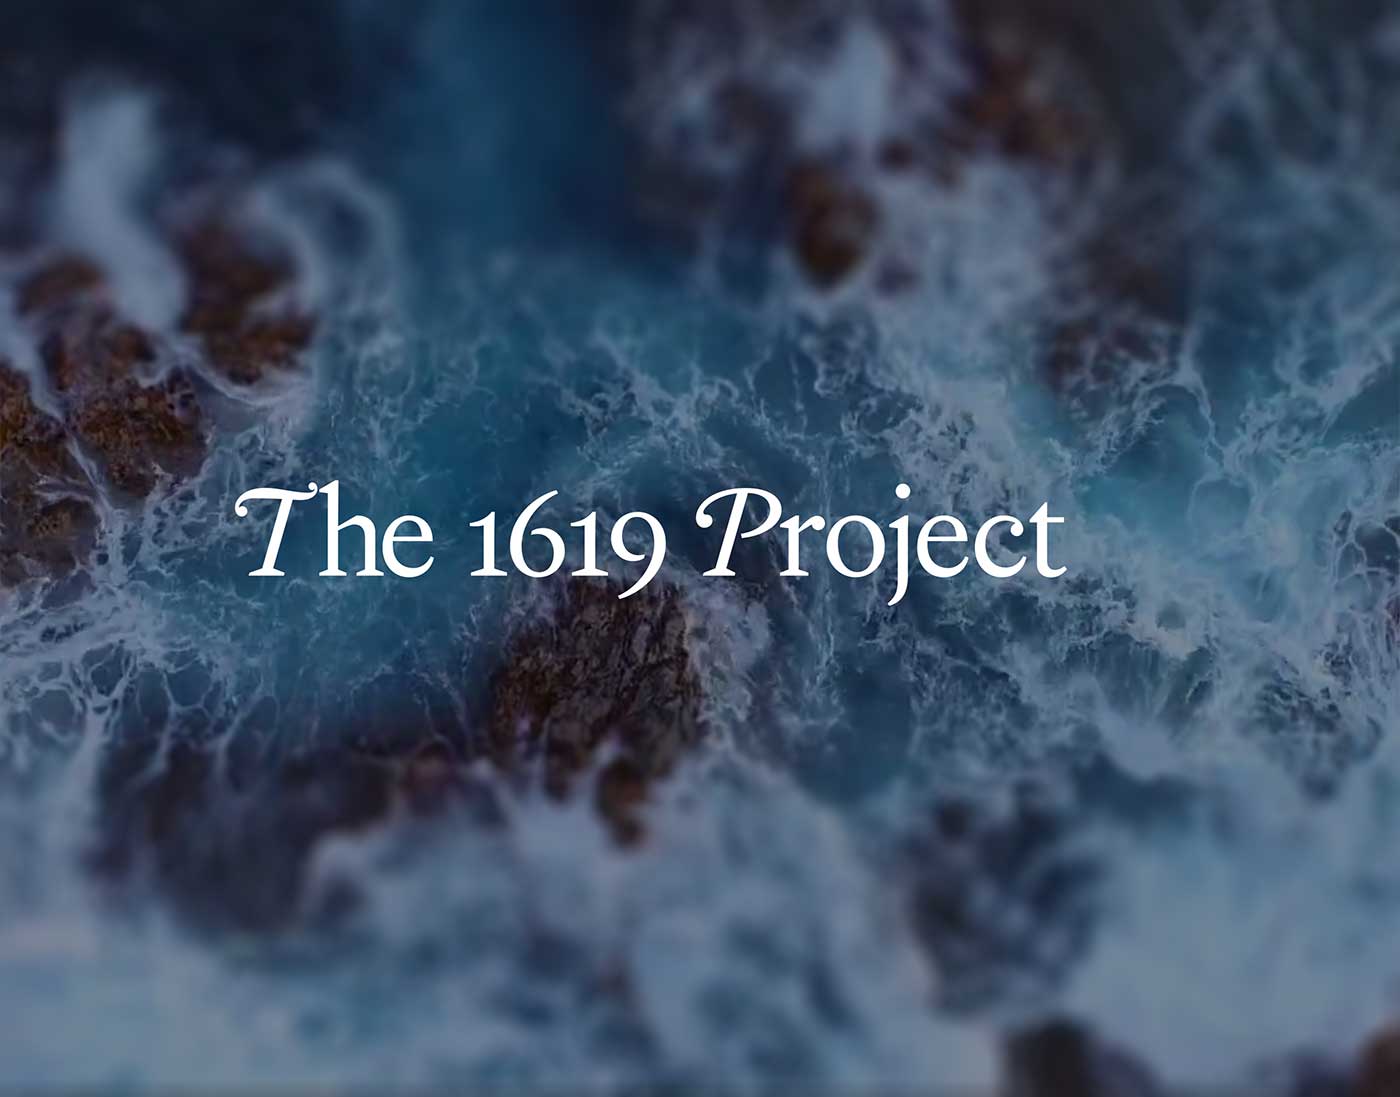 essay on the 1619 project